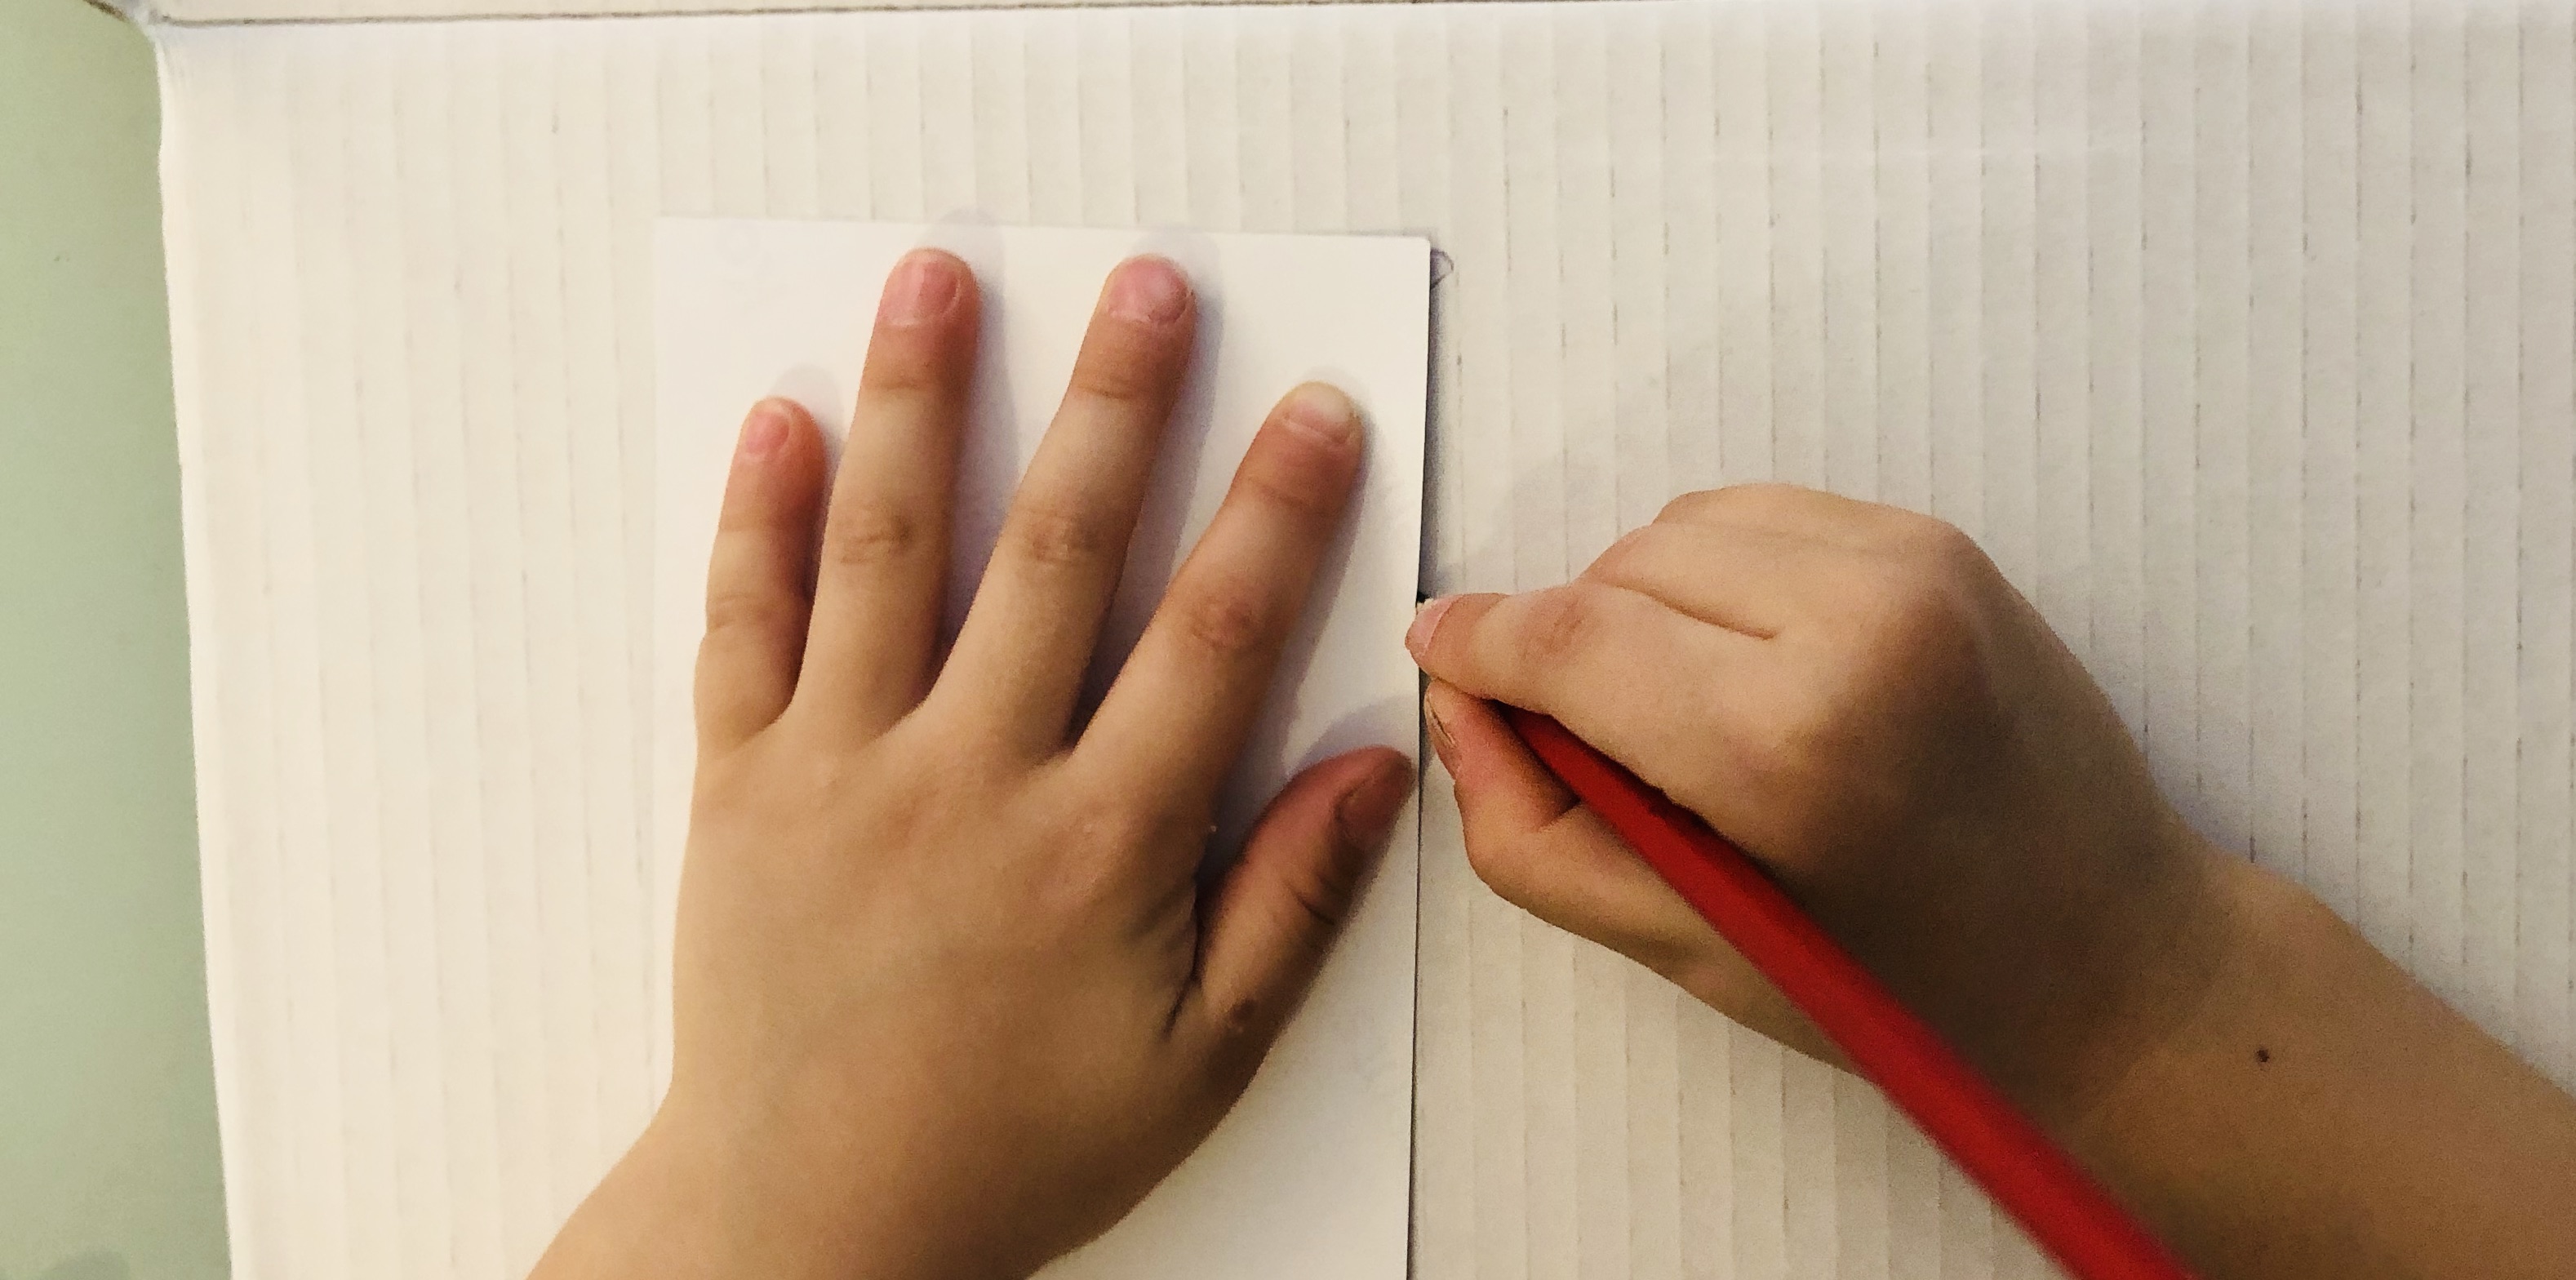 kid outlining a picture area on cardboard